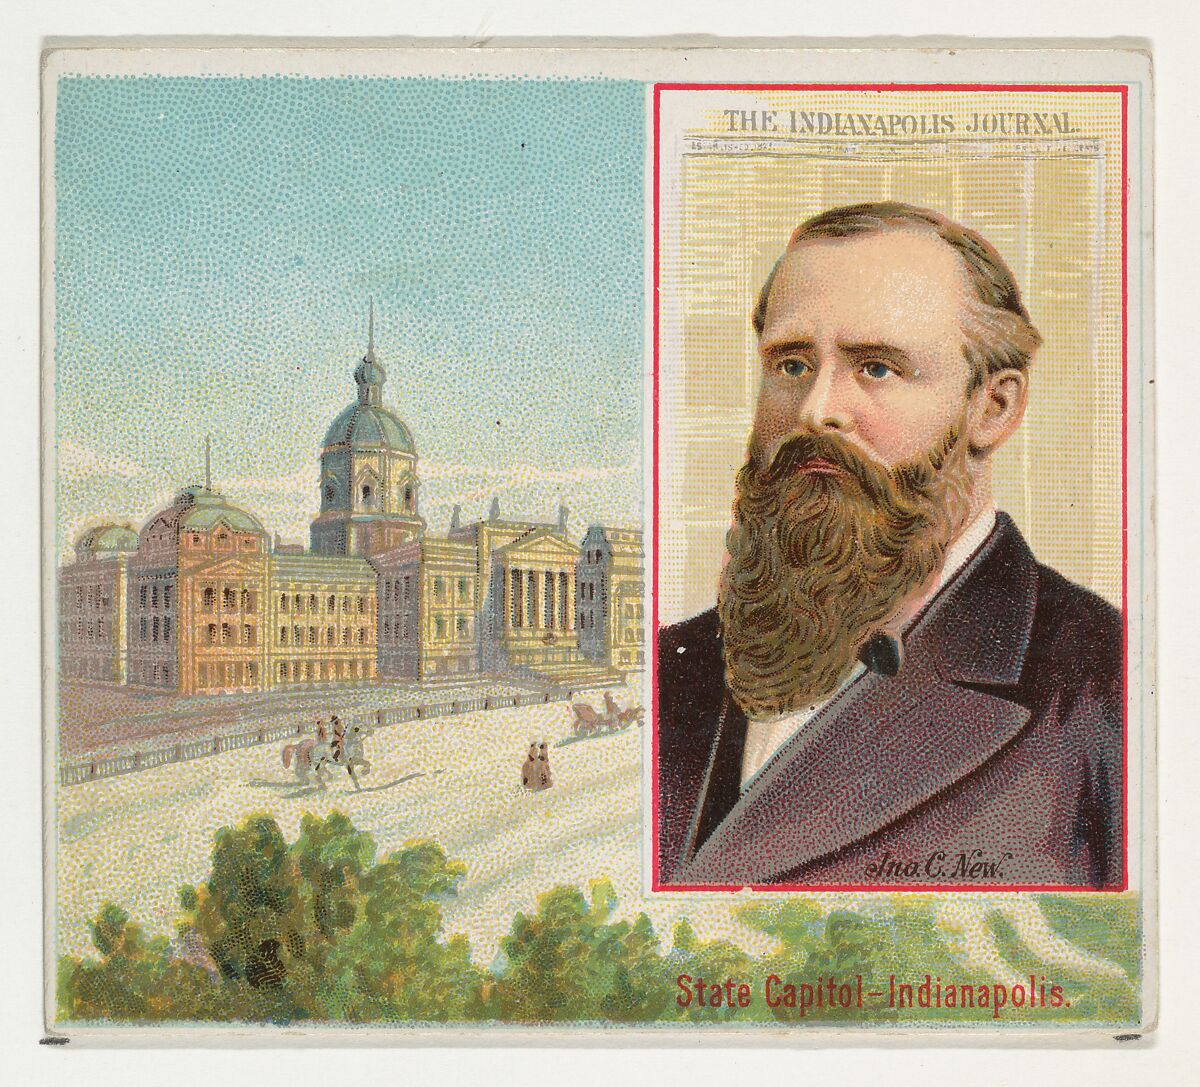 John C. New, The Indianapolis Journal, from the American Editors series (N35) for Allen & Ginter Cigarettes, Issued by Allen &amp; Ginter (American, Richmond, Virginia), Commercial color lithograph 